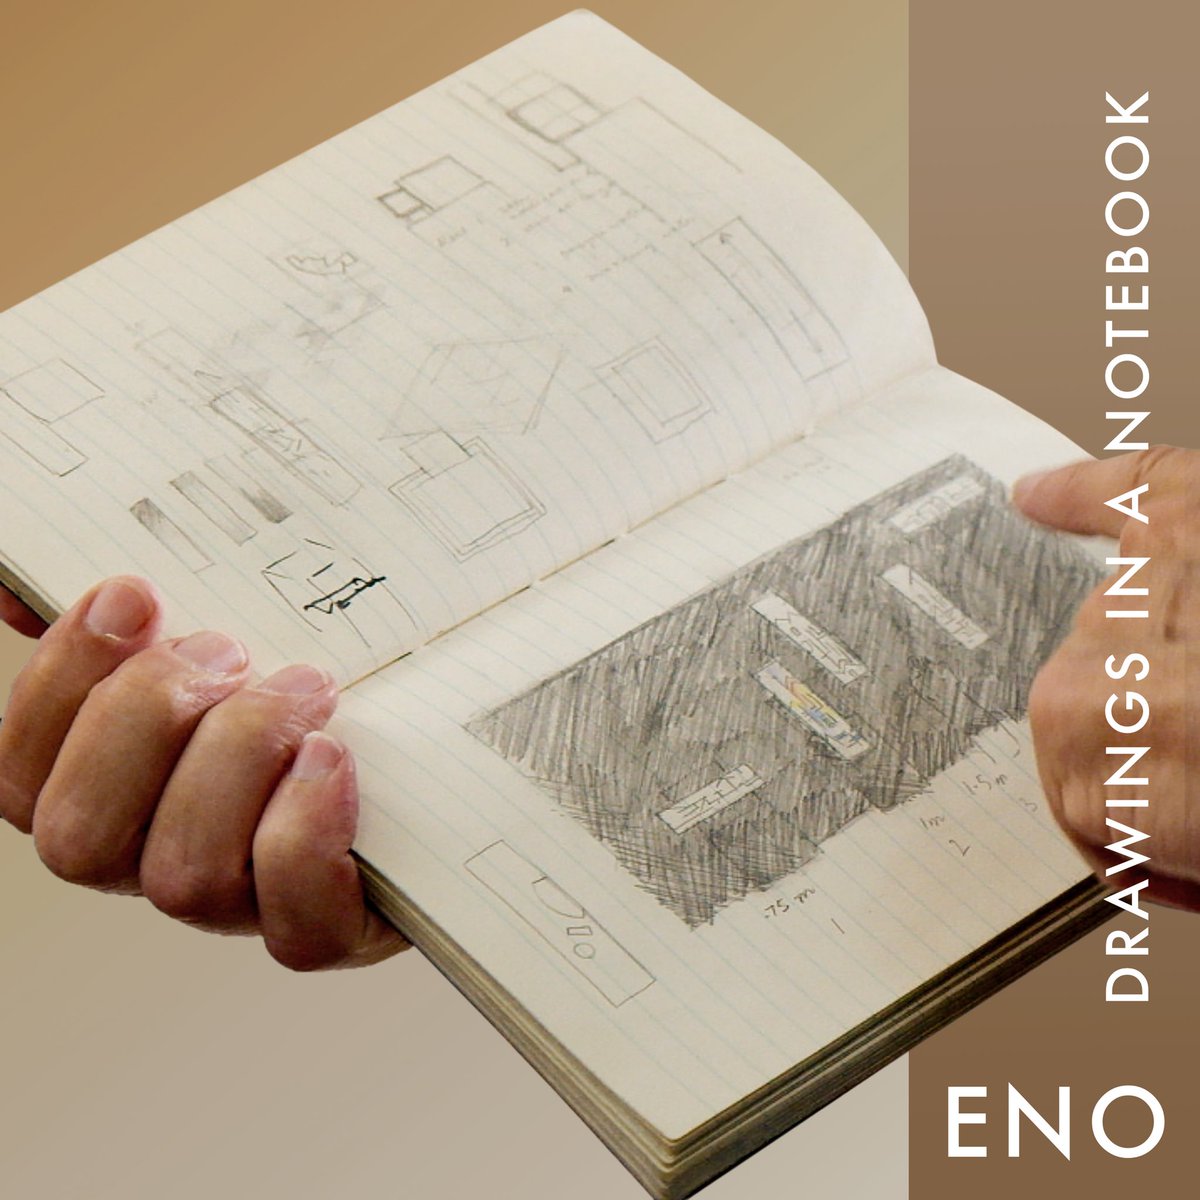 “Drawings in a Notebook” is the first of a series of 4 digital EPs that dives deeper into Brian Eno's music from the career-spanning generative film, ‘Eno’. Each EP title, coined by director, Gary Hustwit, represents a single frame from the film. Link in bio to listen 🎧